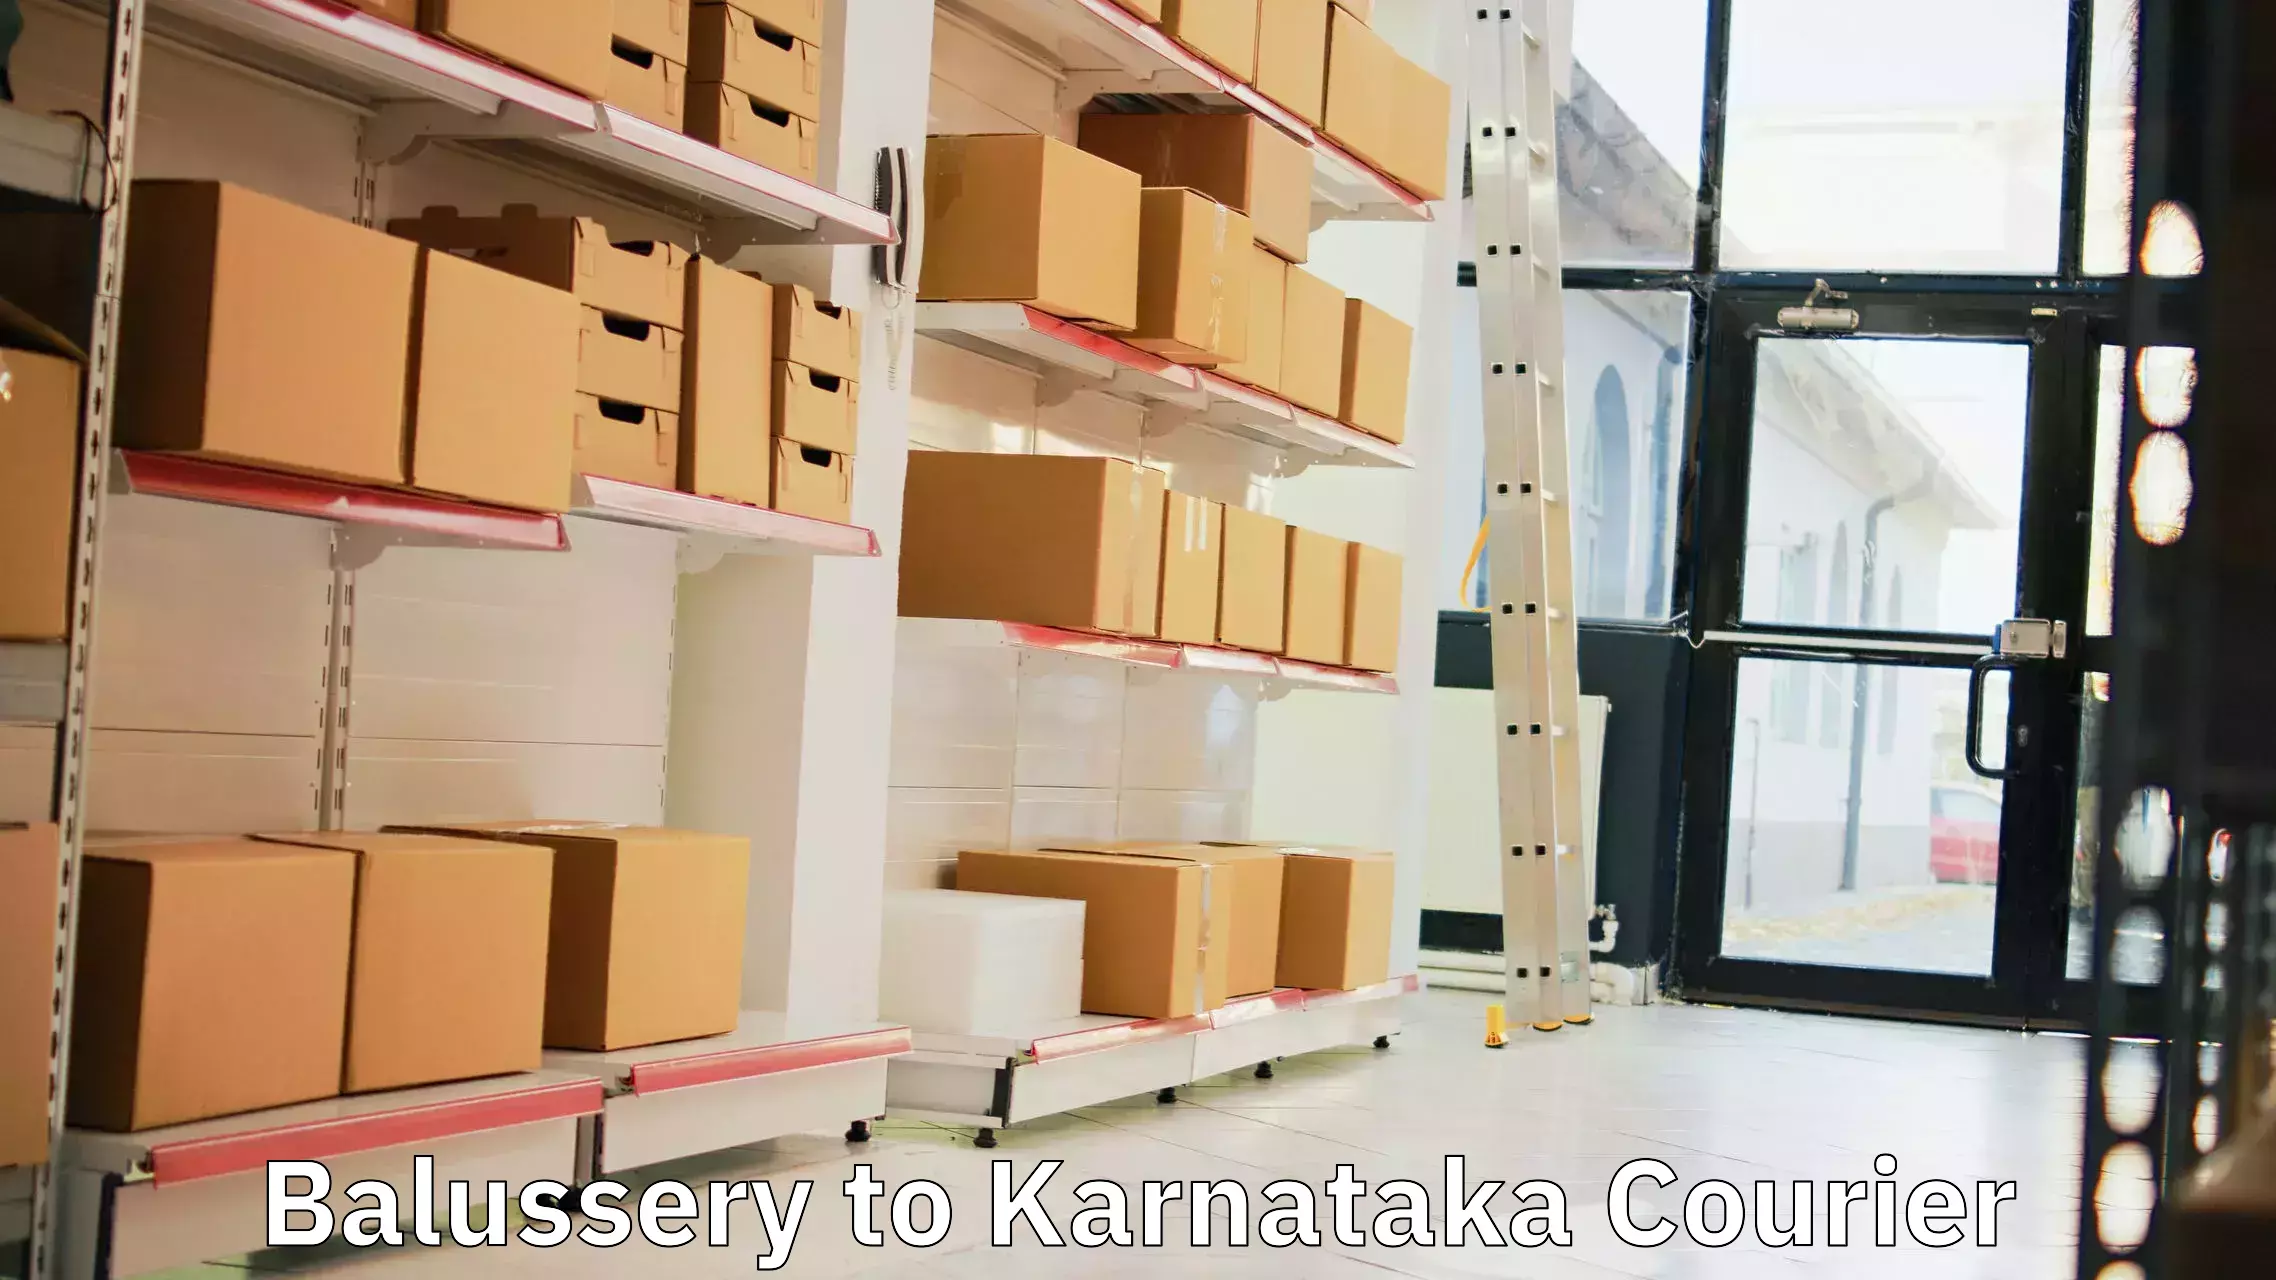 Courier service booking Balussery to Hospet